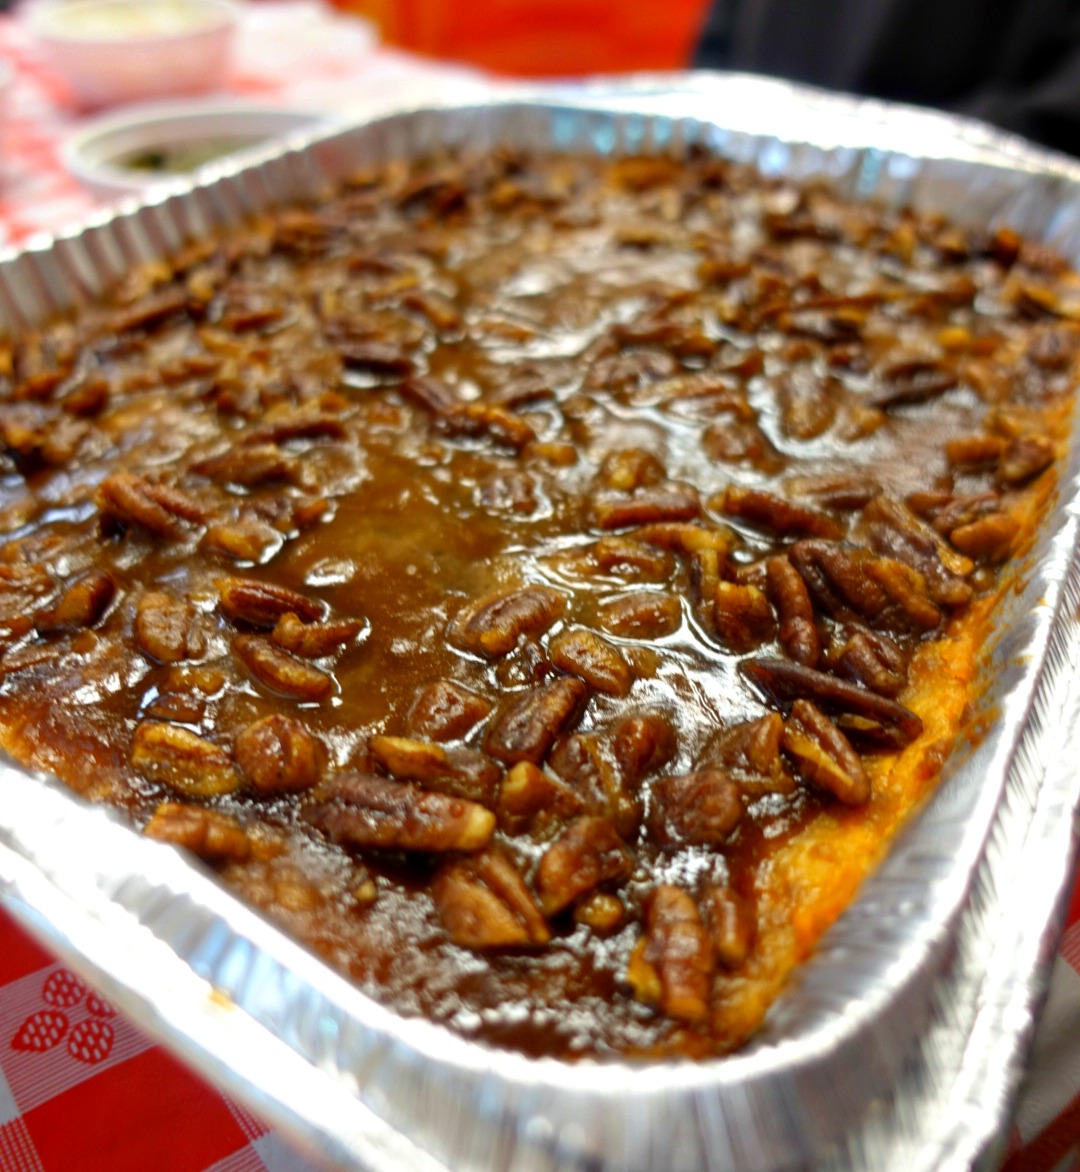 Sweets & Meats is a locally owned barbecue restaurant in Mt Washington with the best pulled chicken and sweet potato casserole I've ever tasted!!